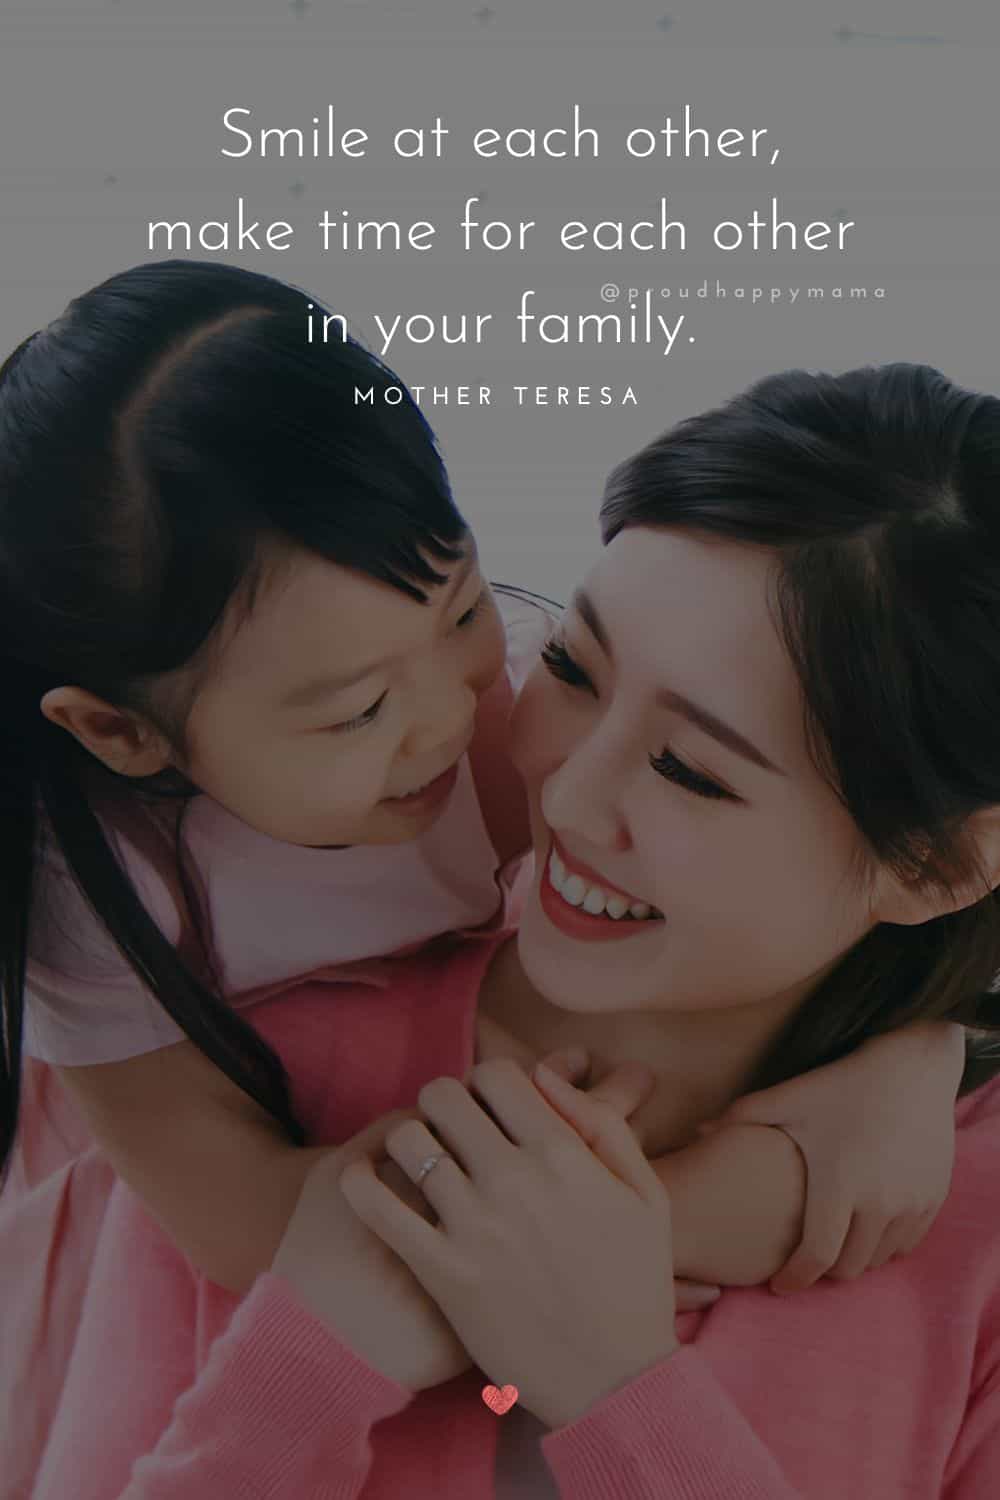 time with family quotes - Smile at each other, make time for each other in your family.